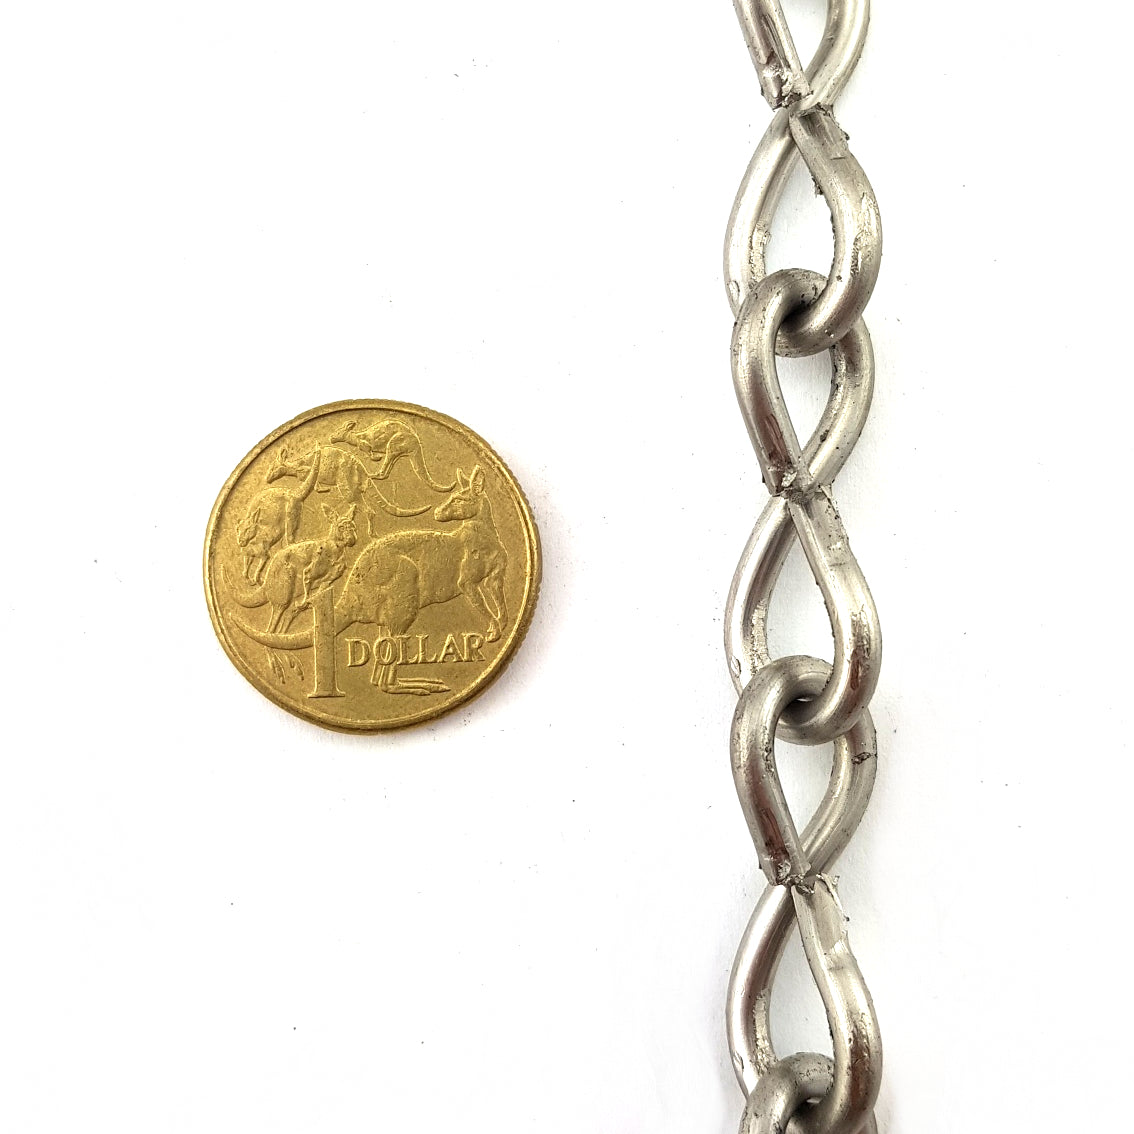 Australian made Single Jack Chain in marine grade stainless steel, size 3.15mm, purchase by the metre. Made in Melbourne, Australia.